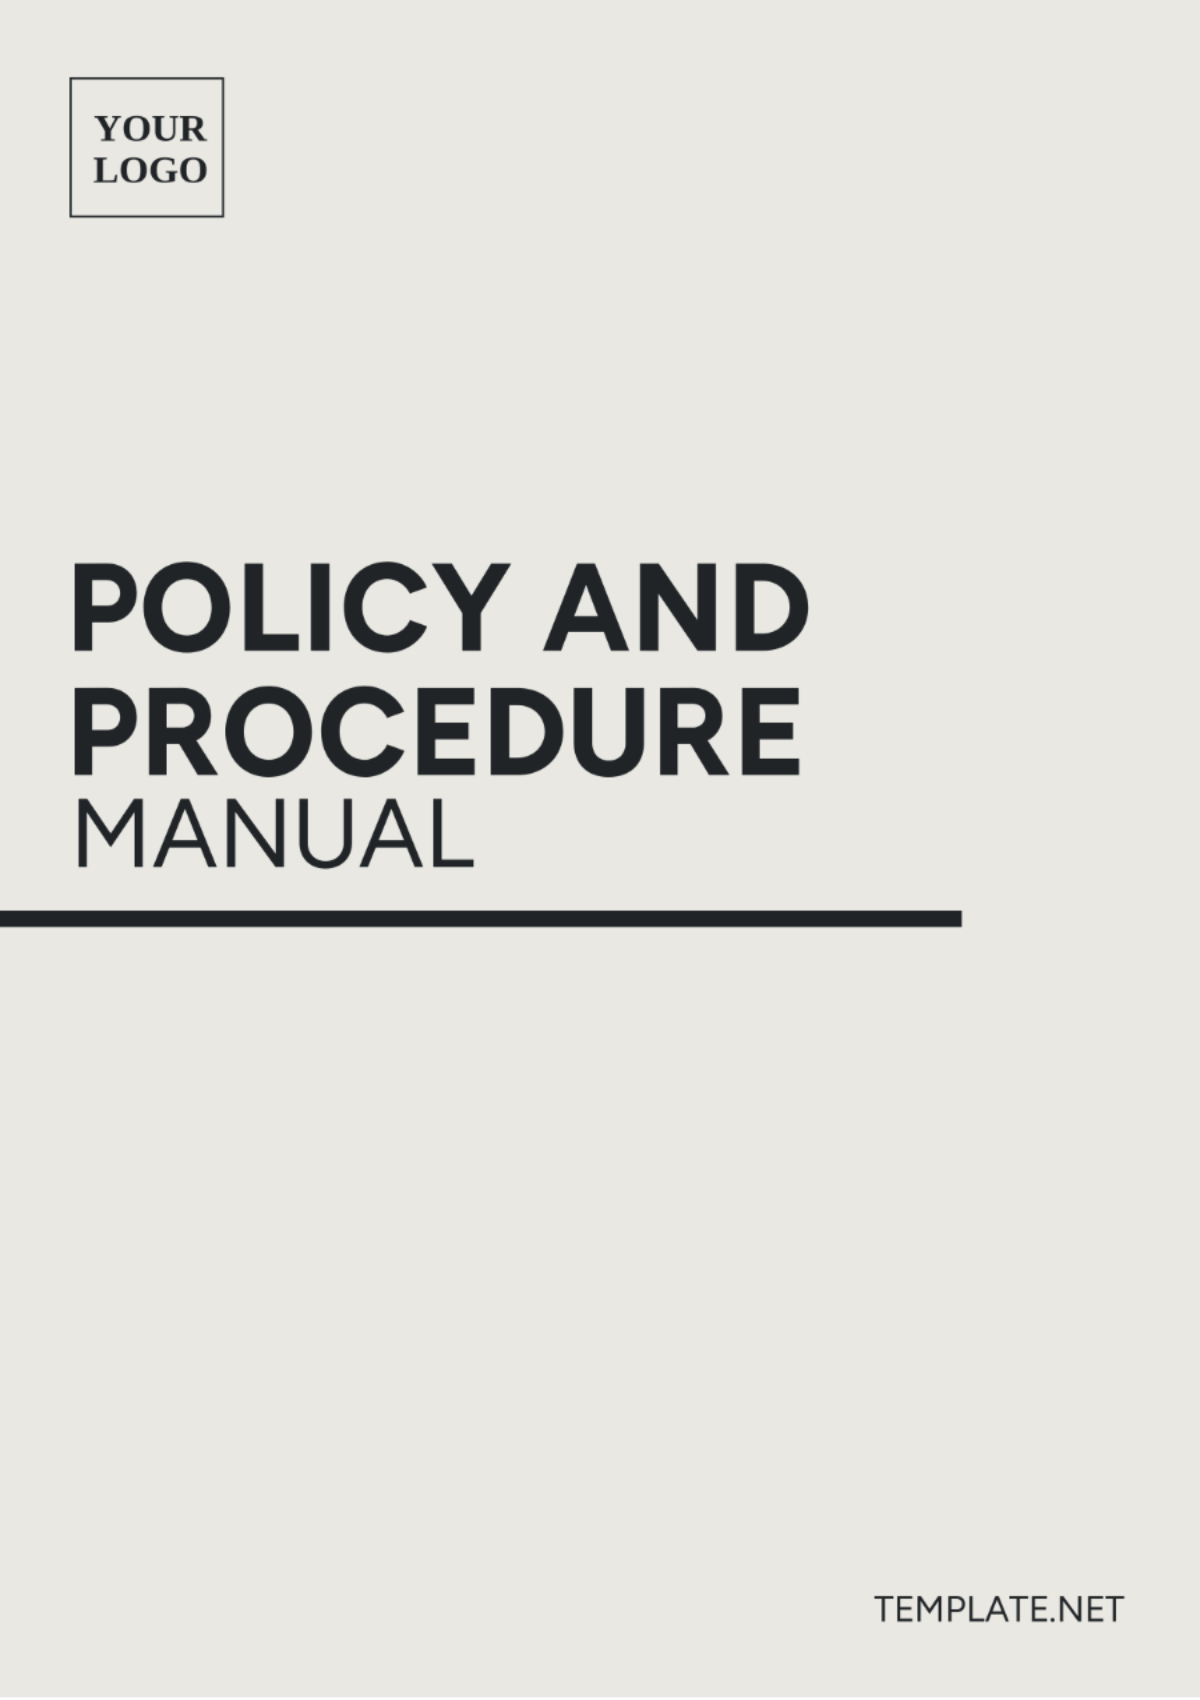 Policy and Procedure Manual Template